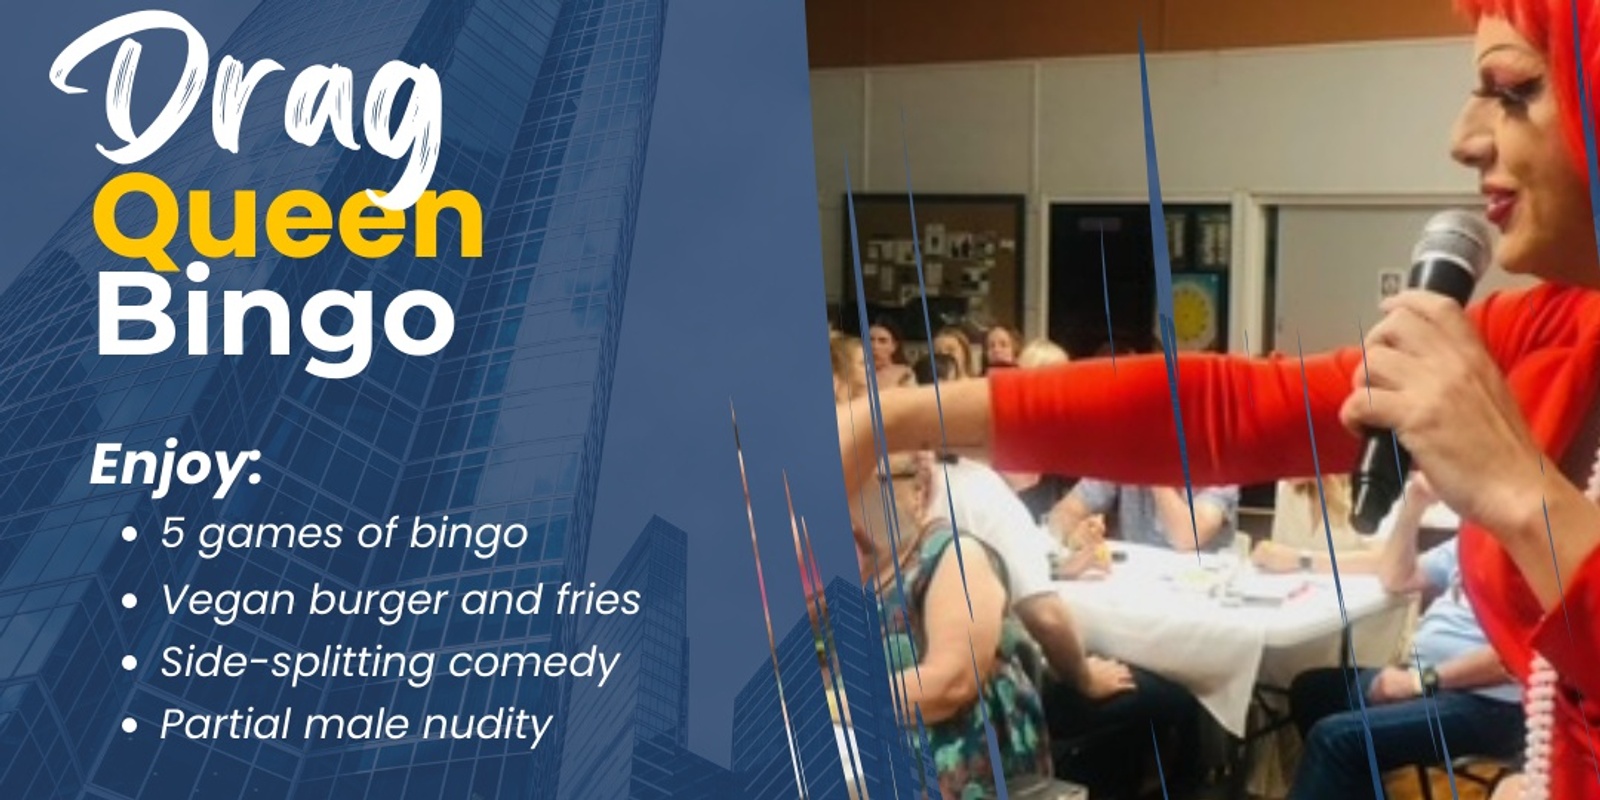 Banner image for Drag Queen Bingo with Grassfed burgers